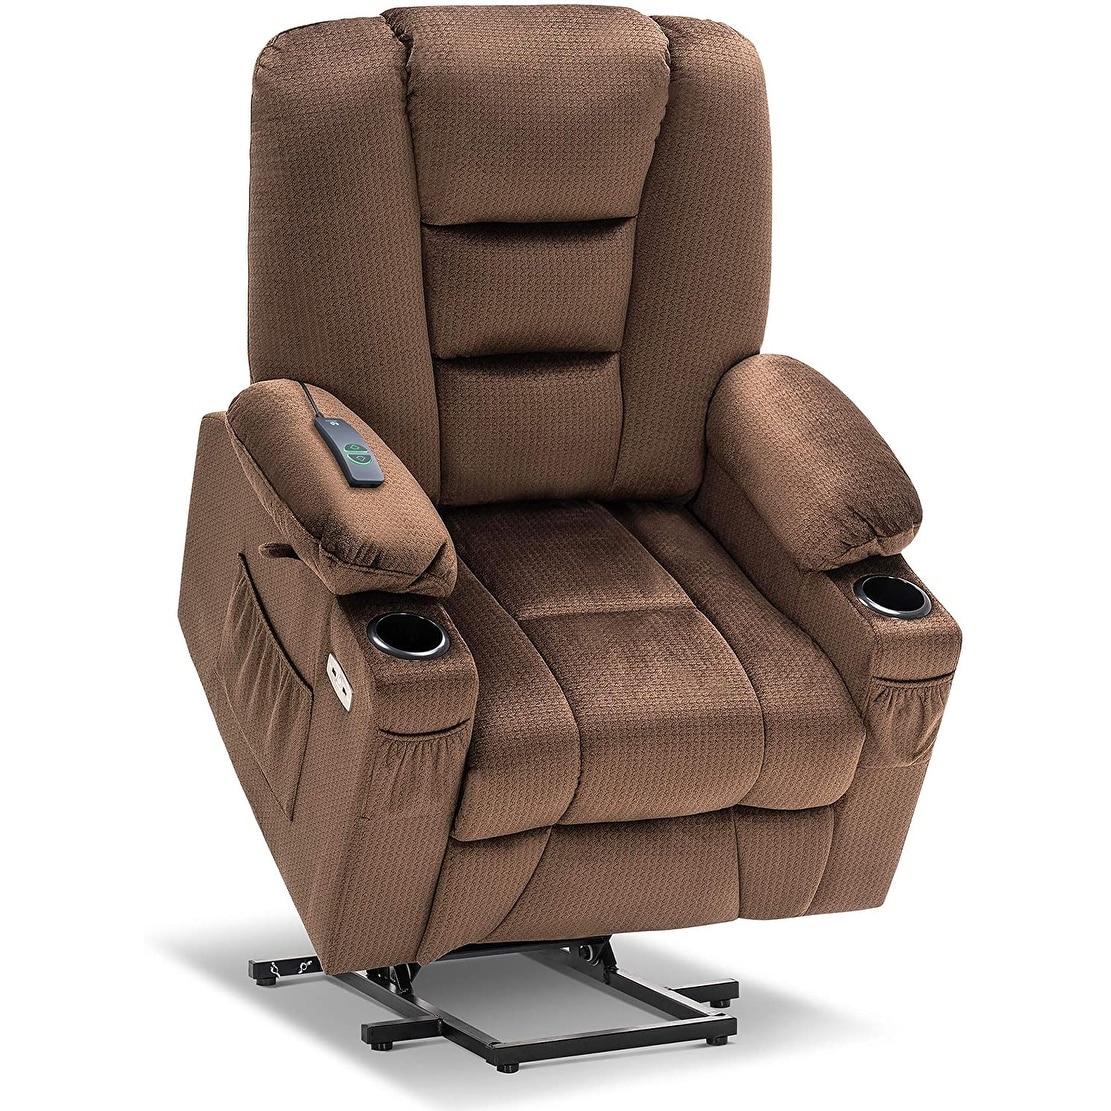 Mcombo Electric Power Lift Recliner Chair with Massage and Heat